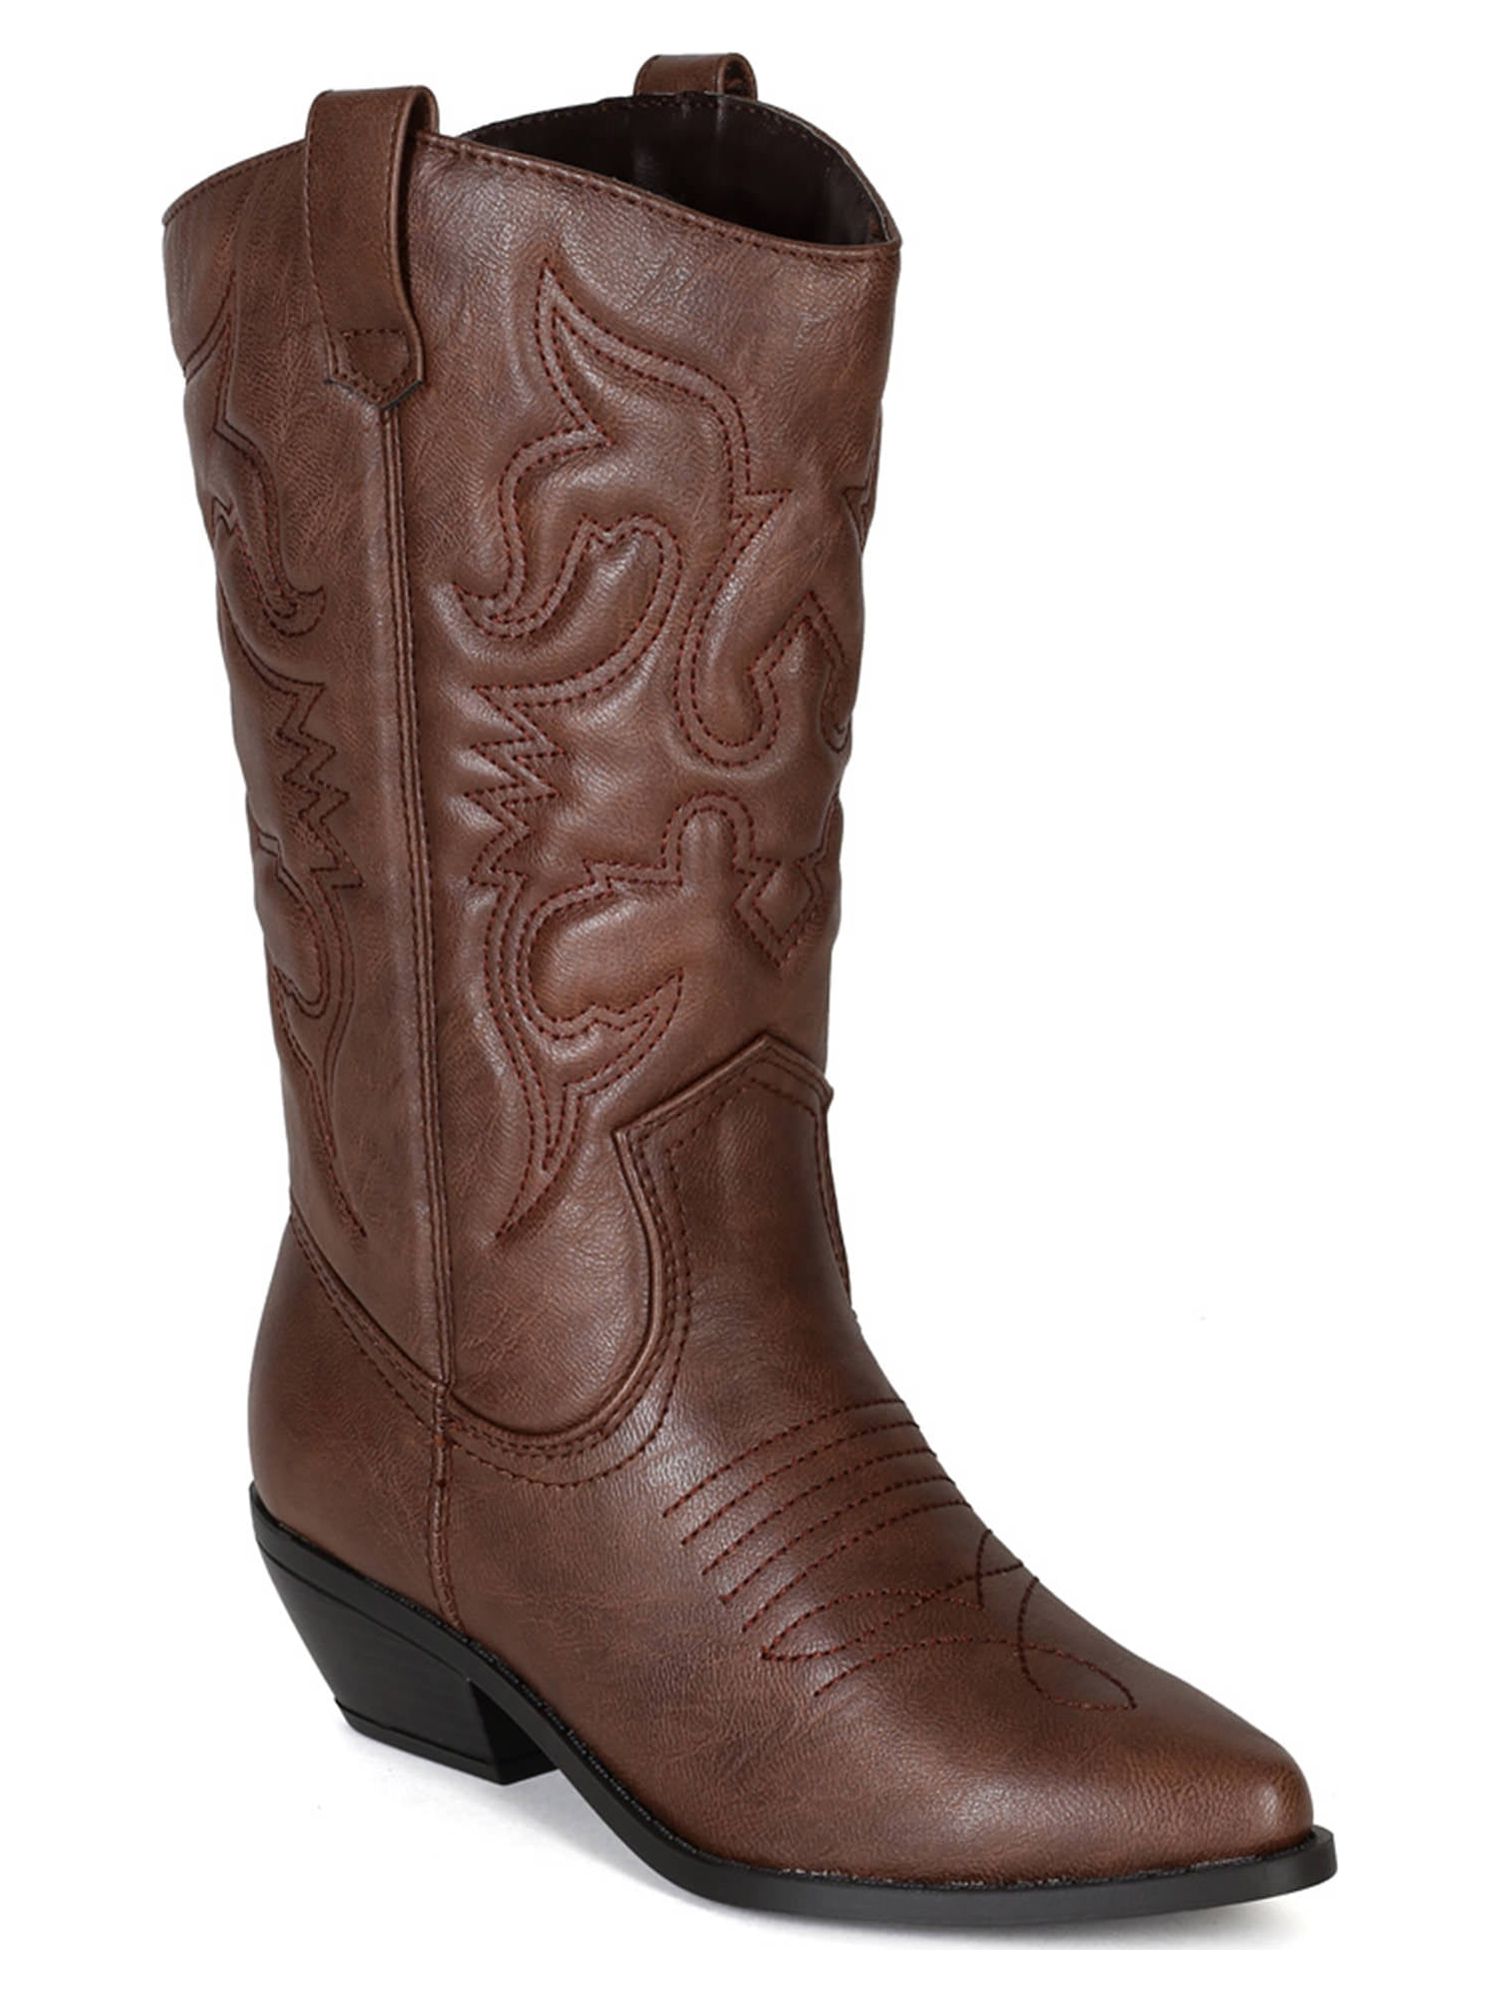 Reno Tan Brwon Soda Cowboy Western Stitched Boots Women Cowgirl Boots Pointy Toe Knee High - image 1 of 3